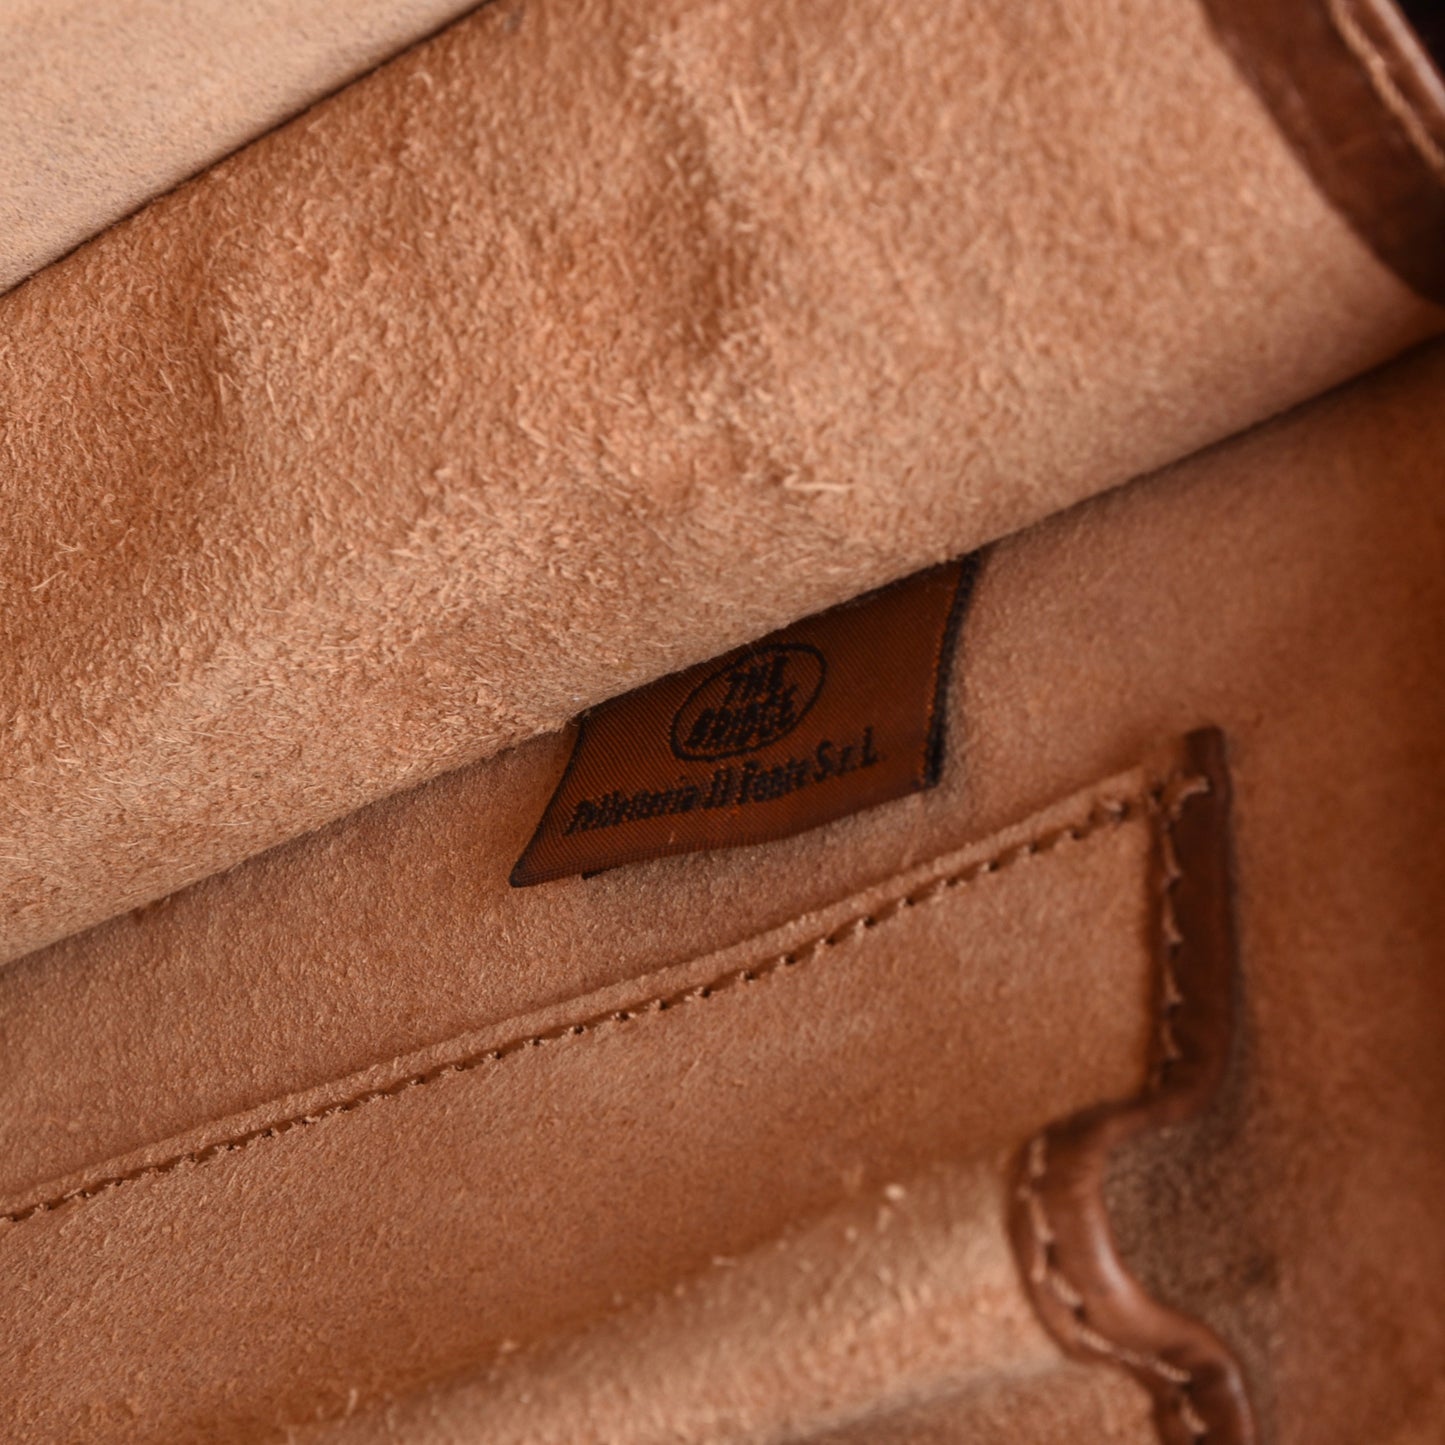 The Bridge Firenze Leather Bag "The Story" - Brown